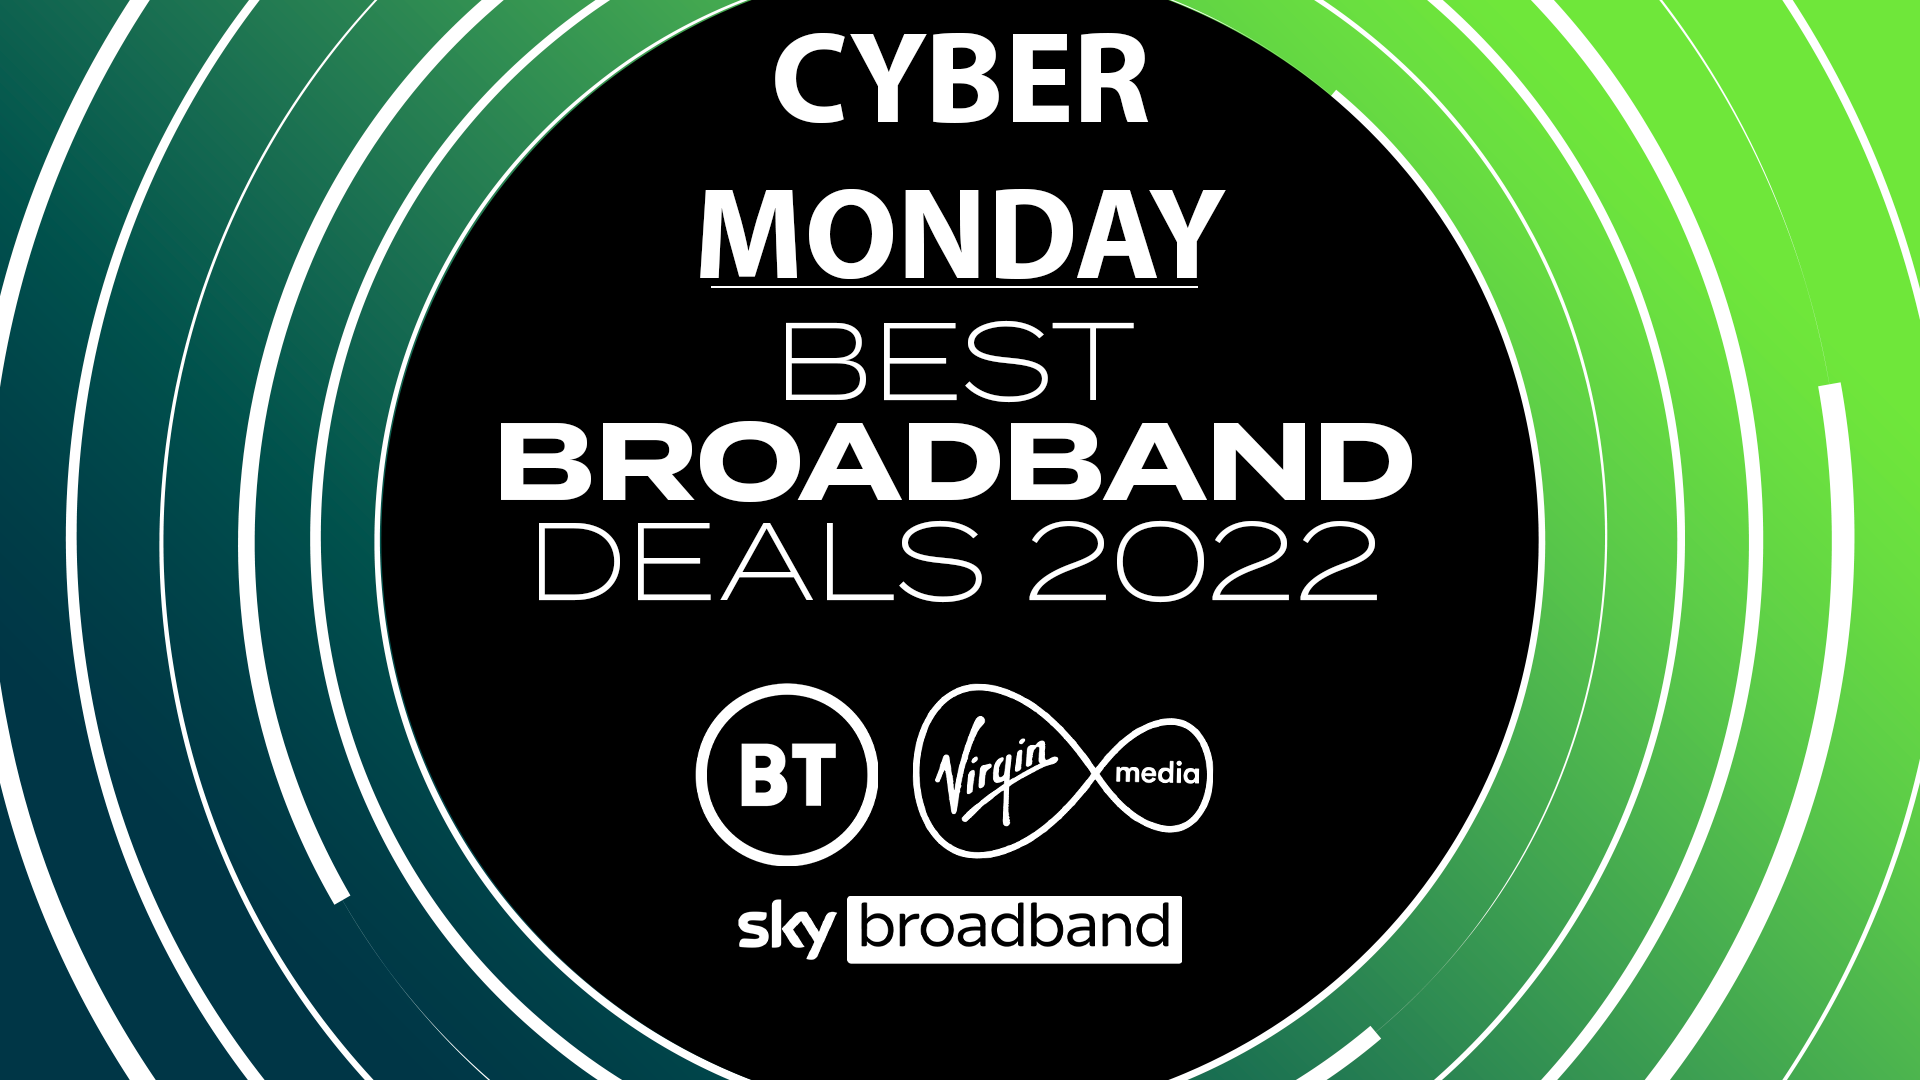 Image for Cyber Monday Broadband deals 2022: best offers